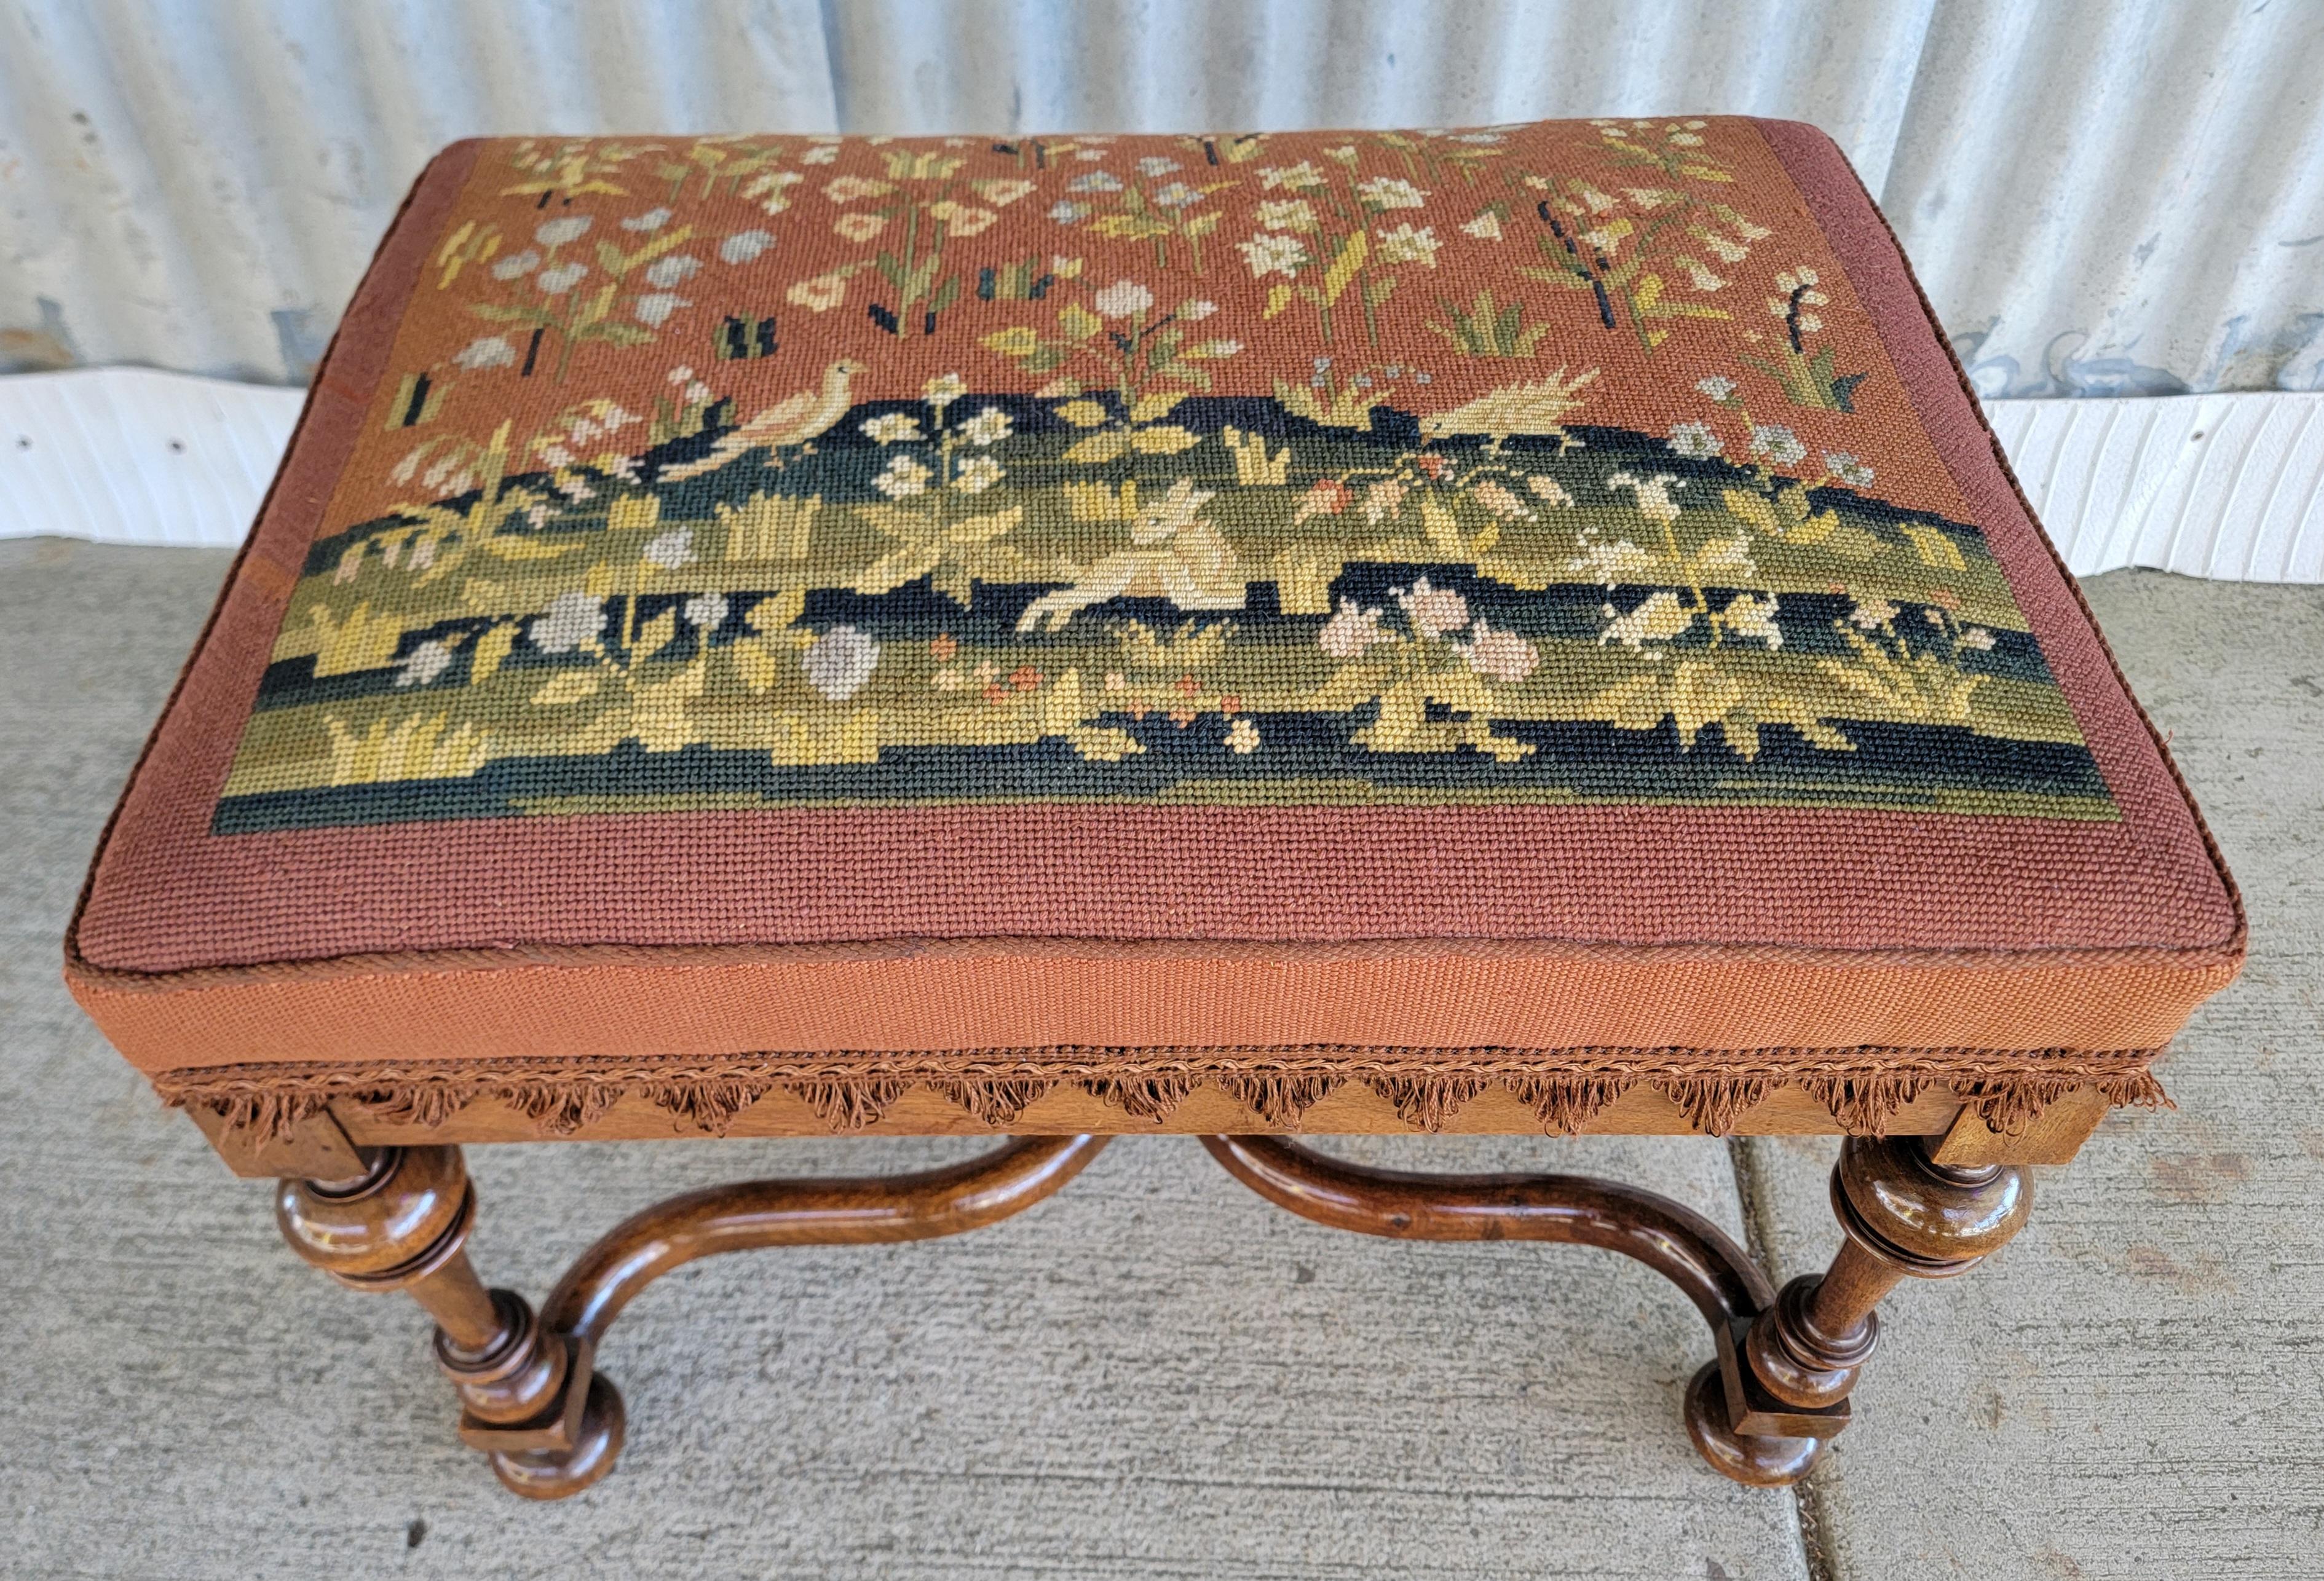 Fabric Early 20th Century Needlepoint Footstool / Ottoman For Sale